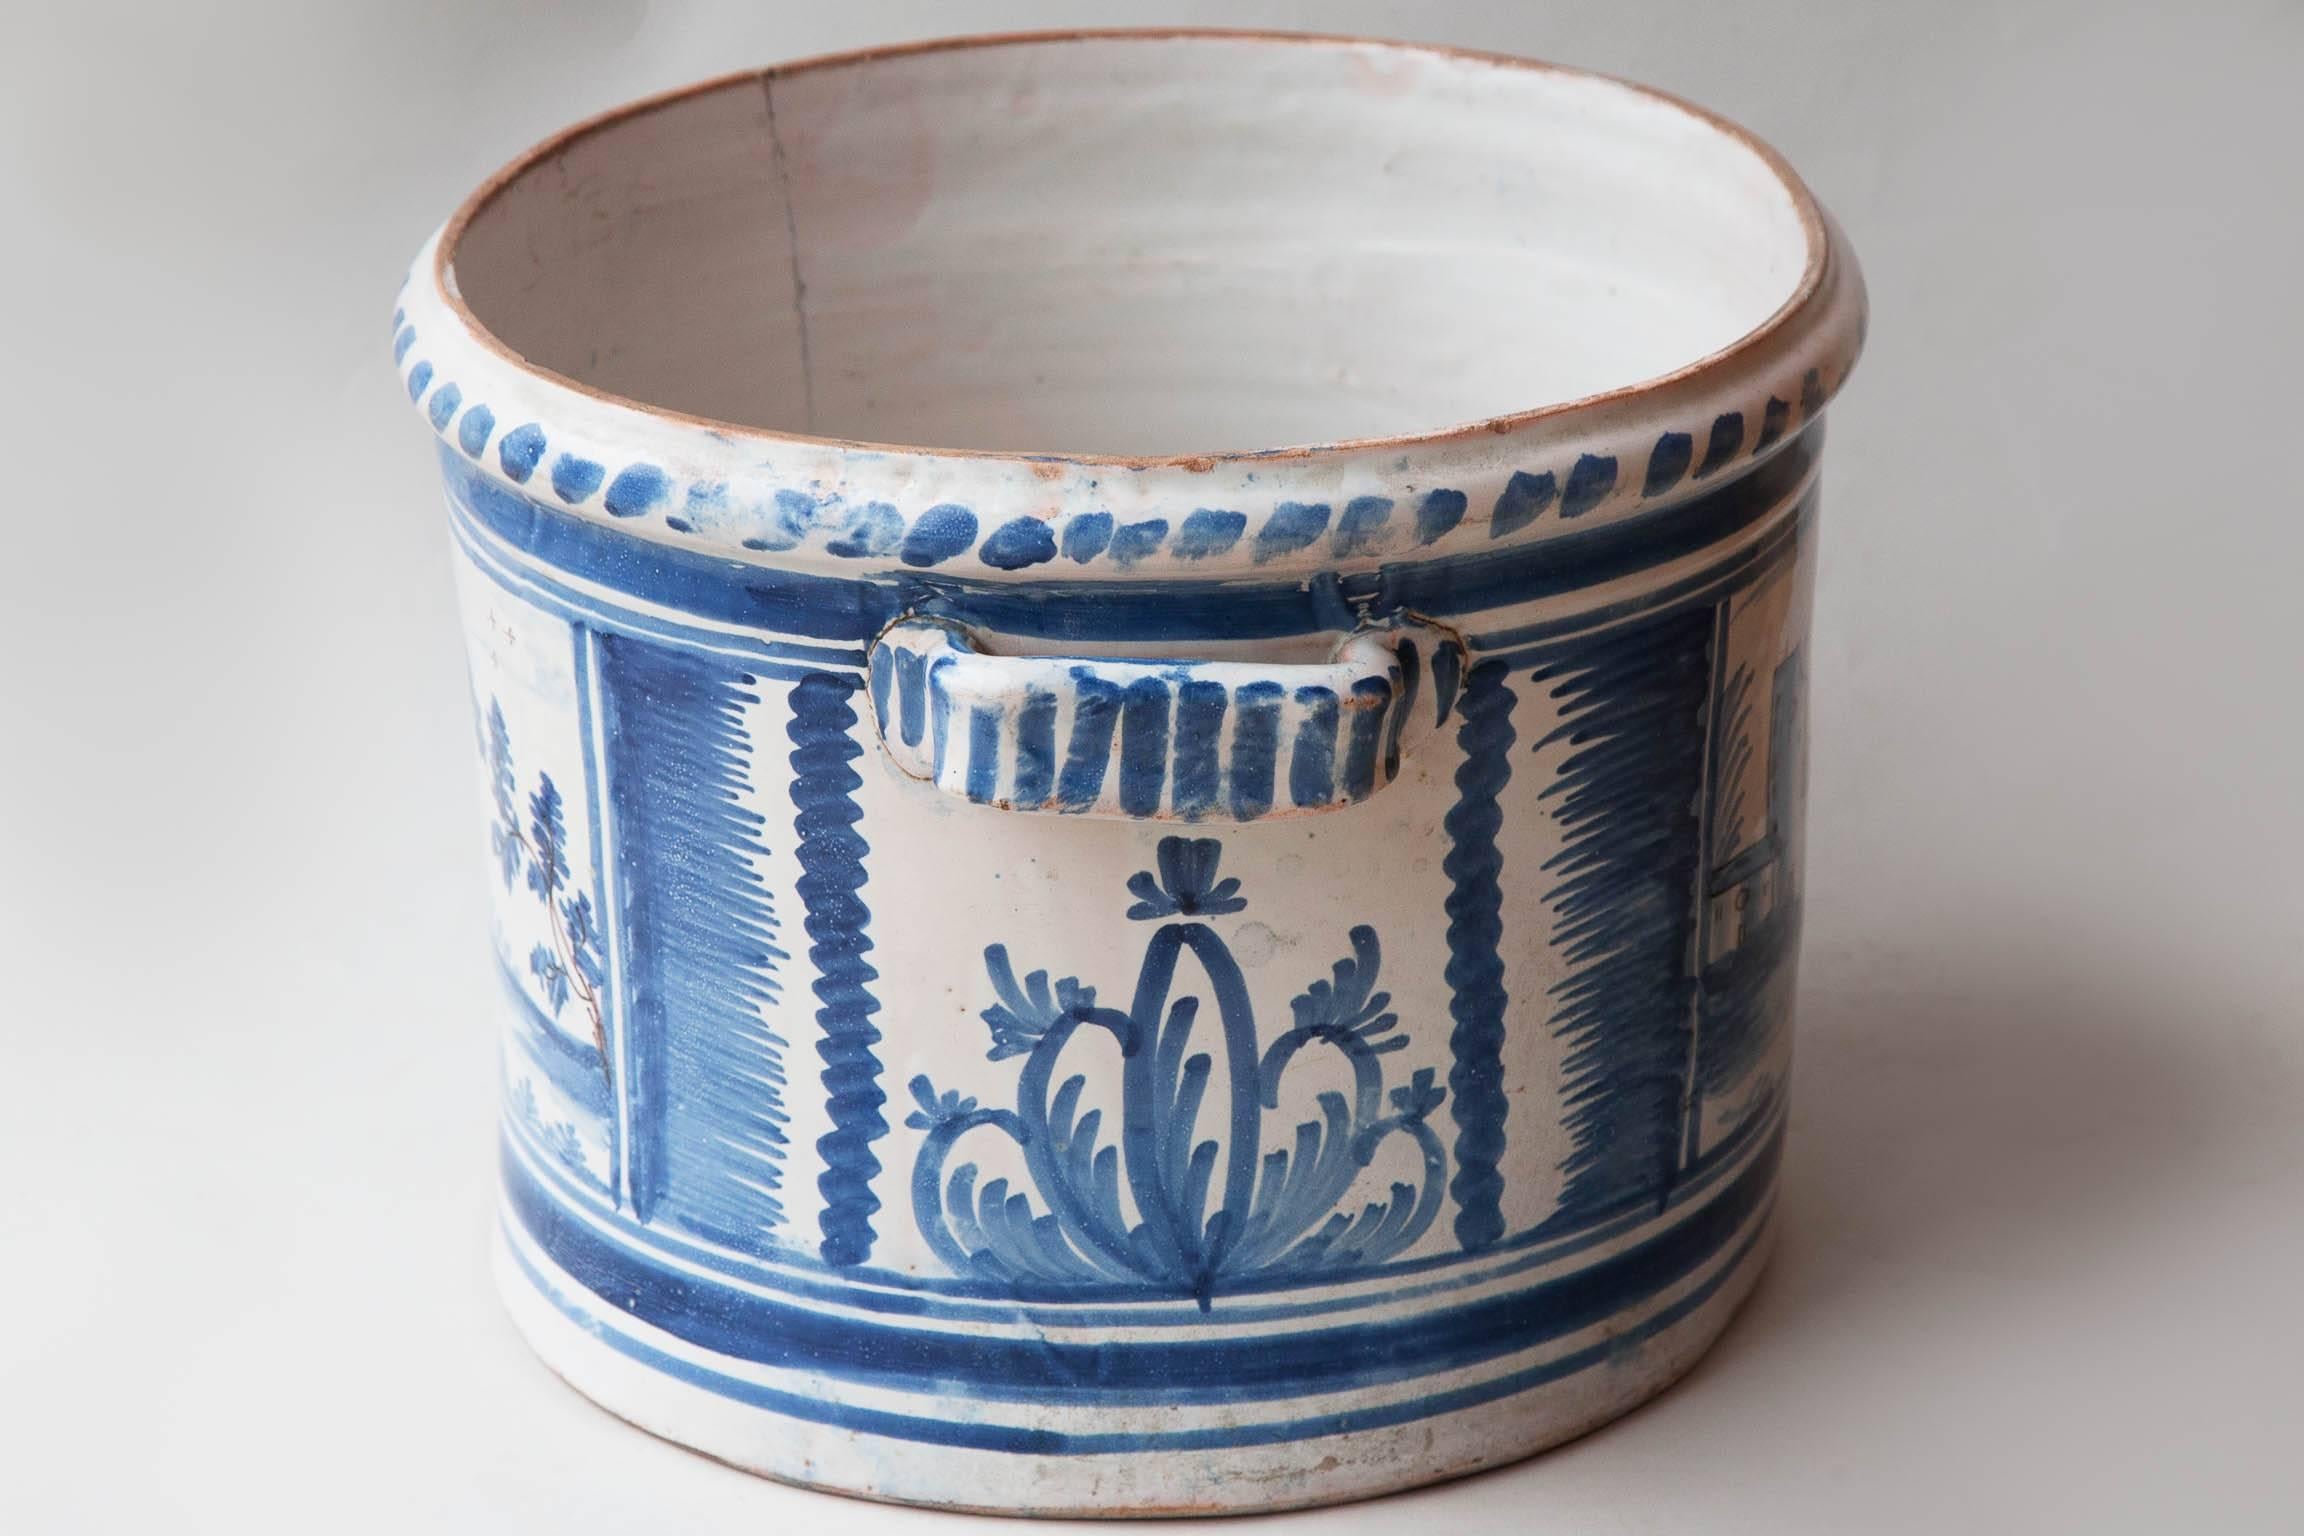 Decor de camaieu bleu representing the same view of a village on both sides. Nevers, France c.1800.

It was due to Louis XIV that Nevers became celebrated for the production of faïence. Towards the end of the 16th century he bought Augustin